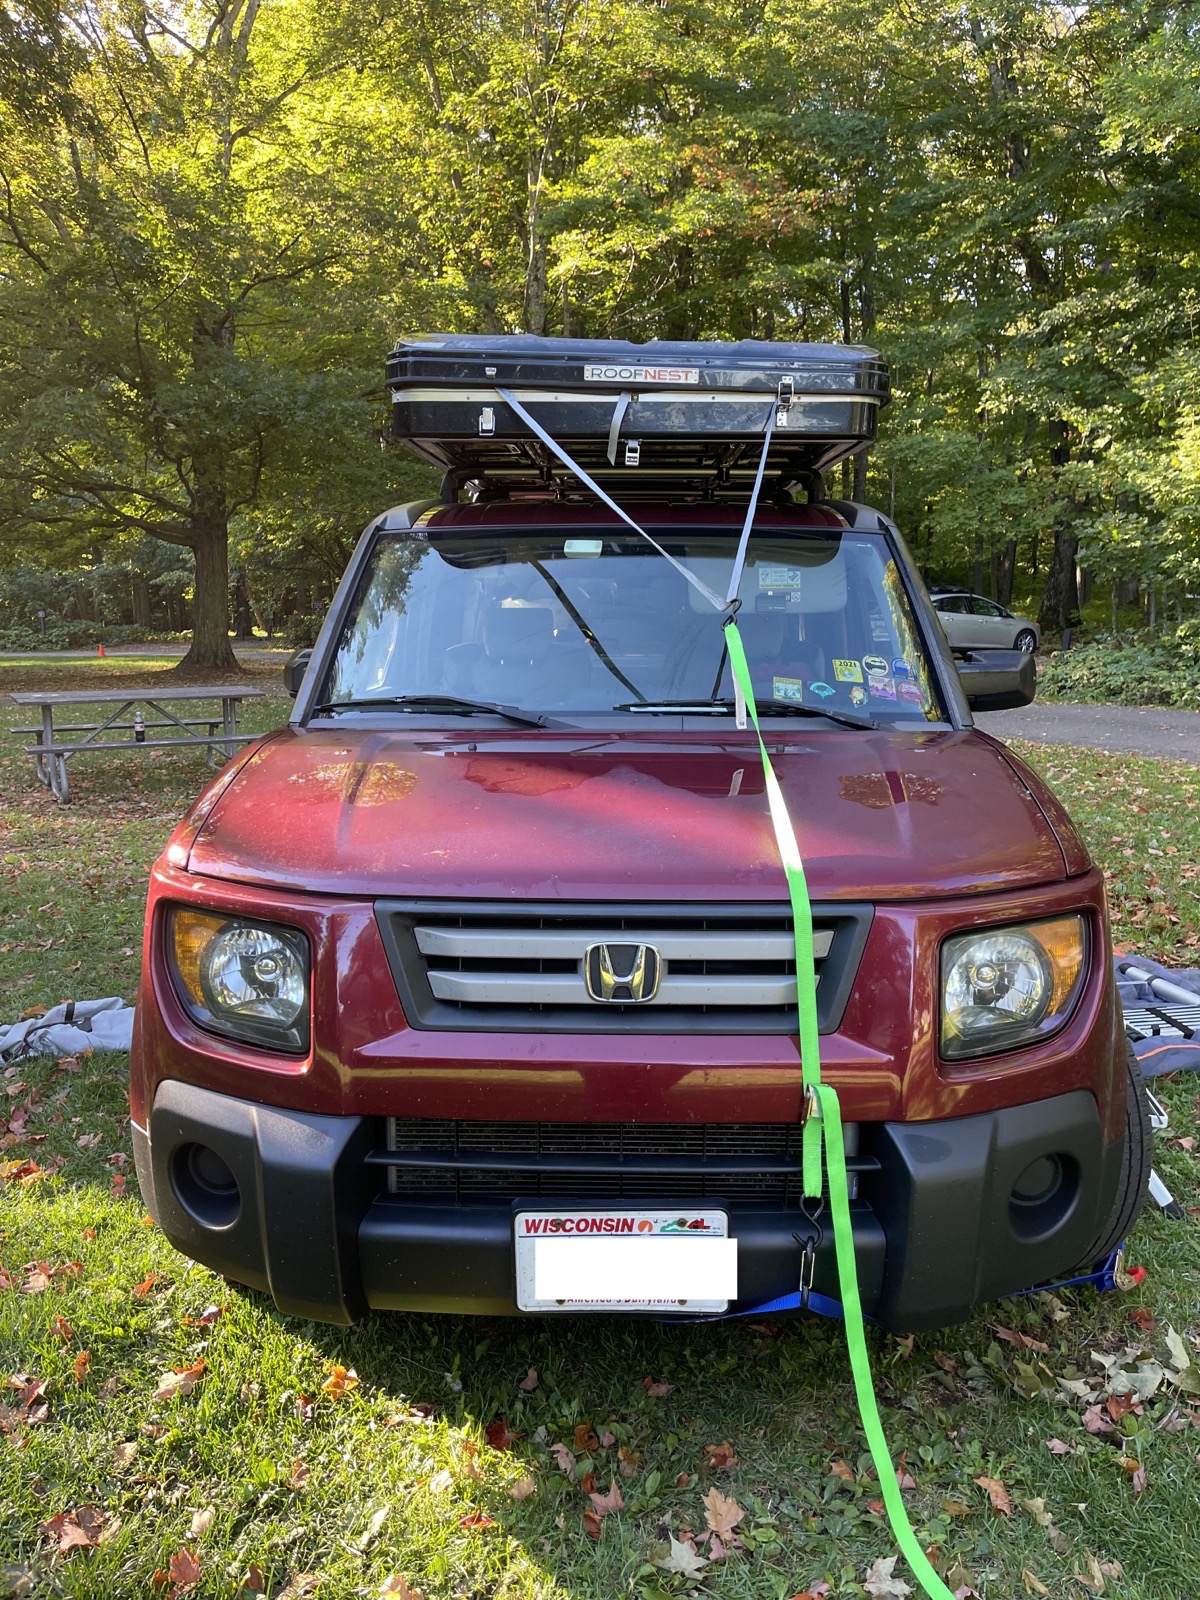 Straps holding the Roofnest Rooftop Tent down to the front bumper